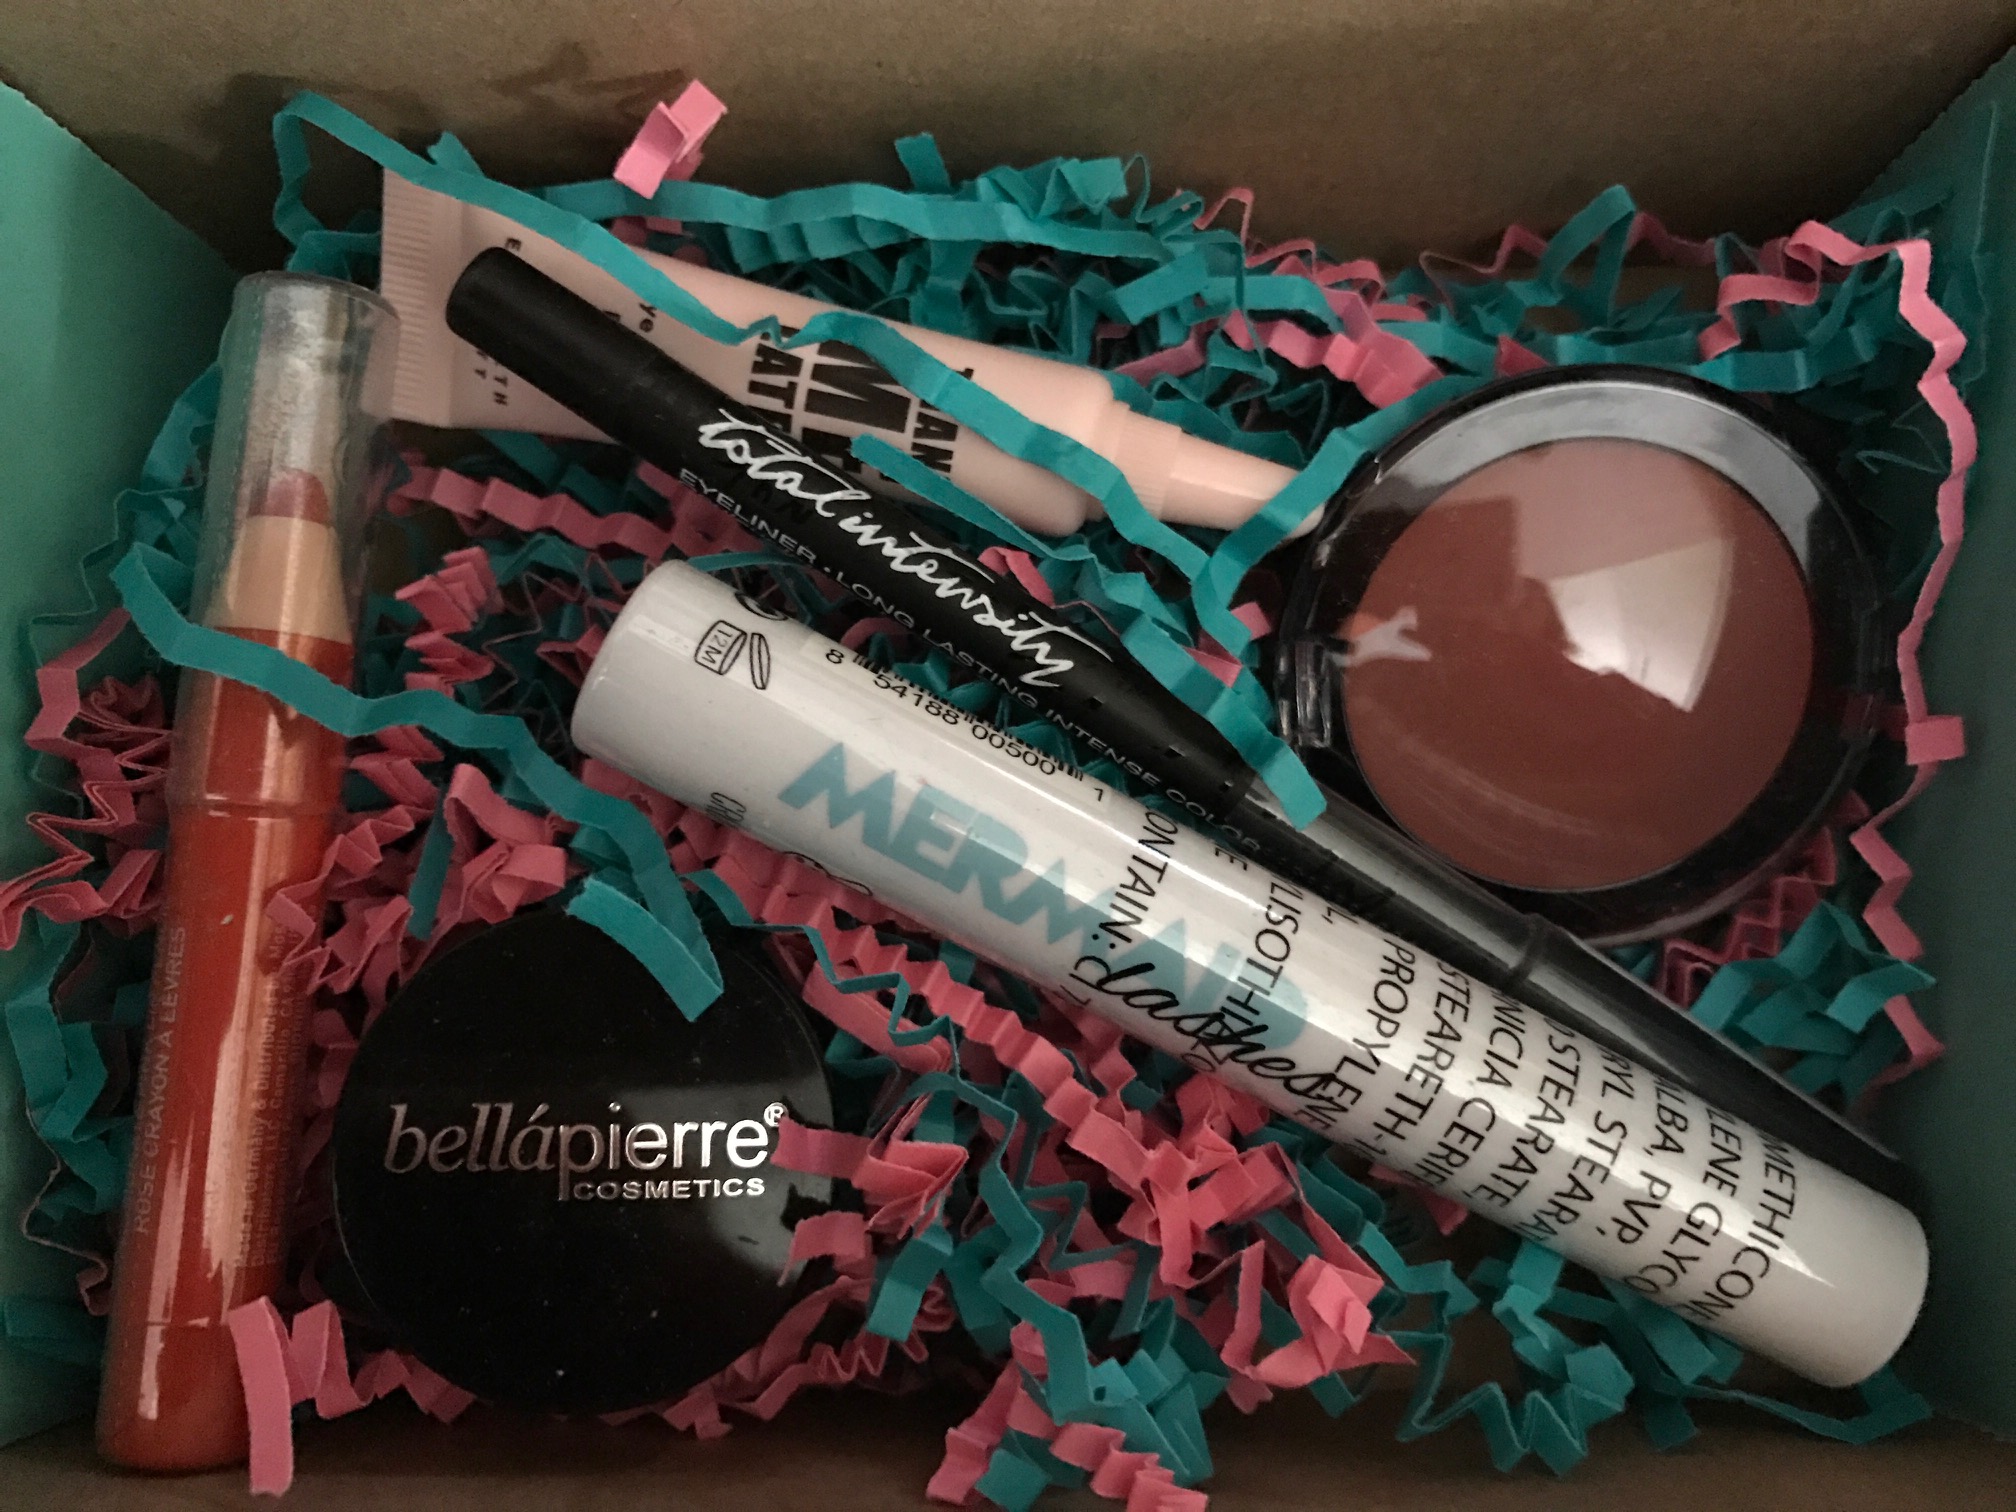 items in special $8 Beauty Box 5 box for Fall 2016 neversaydiebeauty.com